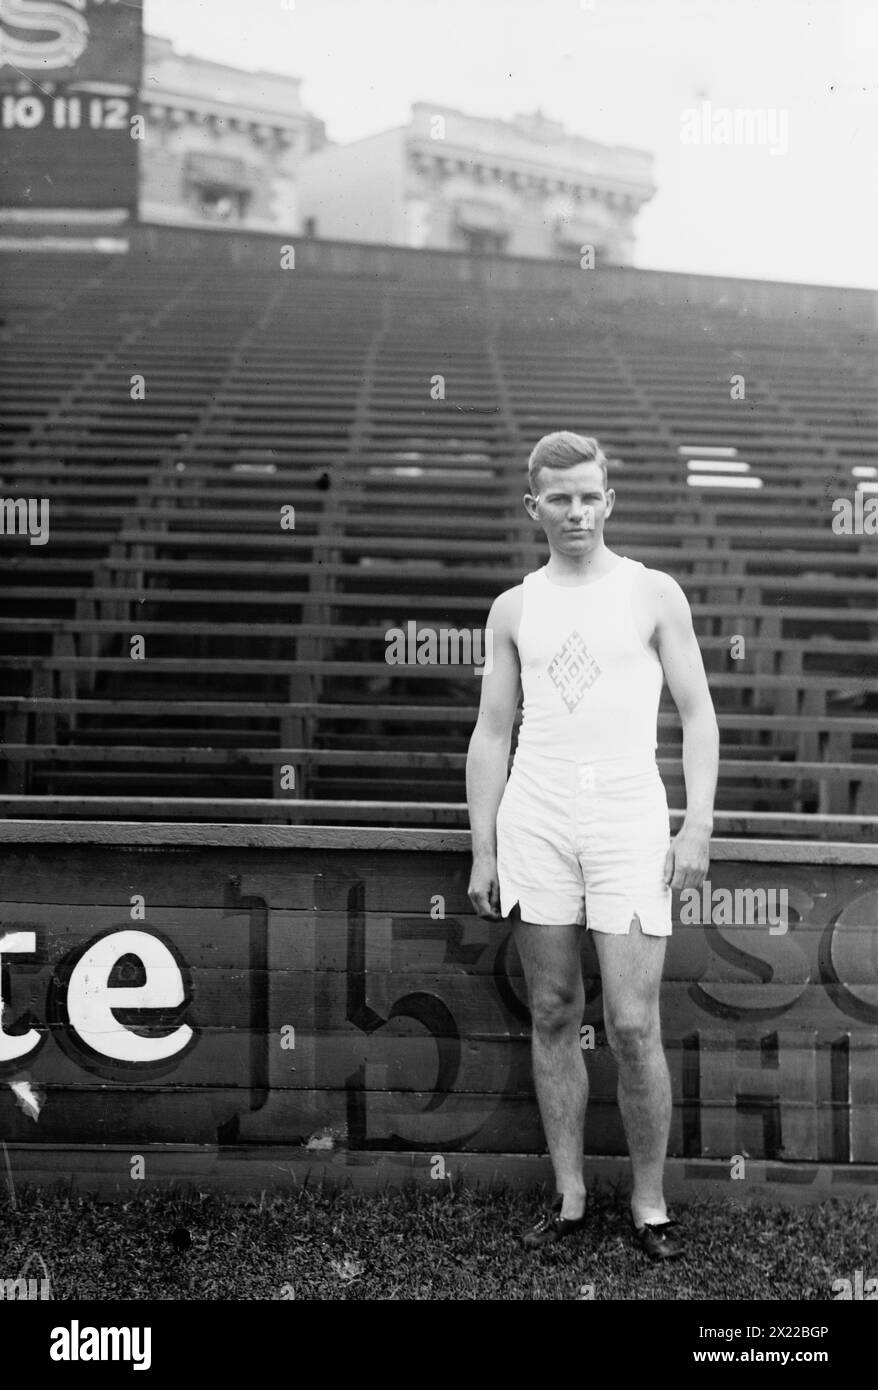 J. Ira Courtney, between c1910 and c1915. Shows John Ira Courtney (1889-1968), a member of the American track and field team at the 1912 Olympics in Stockholm, Sweden. Stock Photo